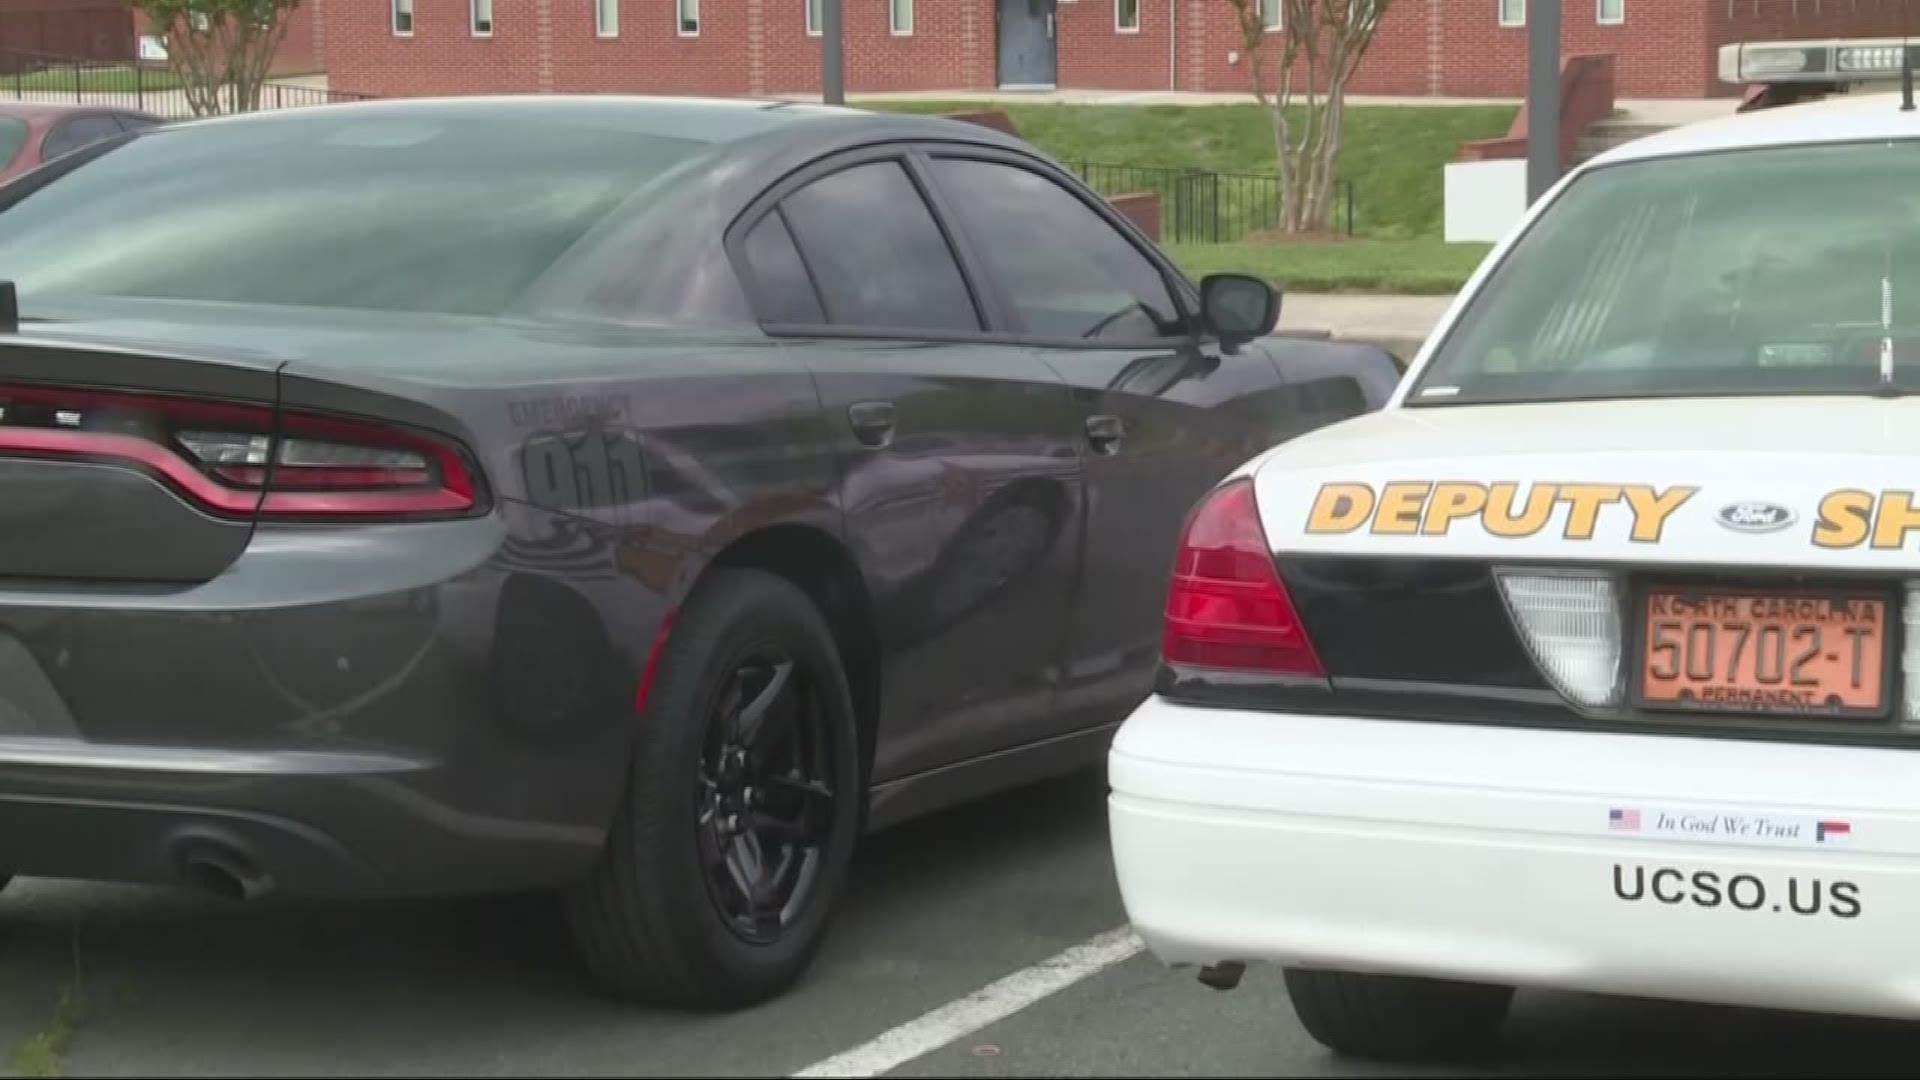 The Union County Sheriff's Office is rolling out new "ghost" patrol cars, which are specifically designed to be difficult to spot.